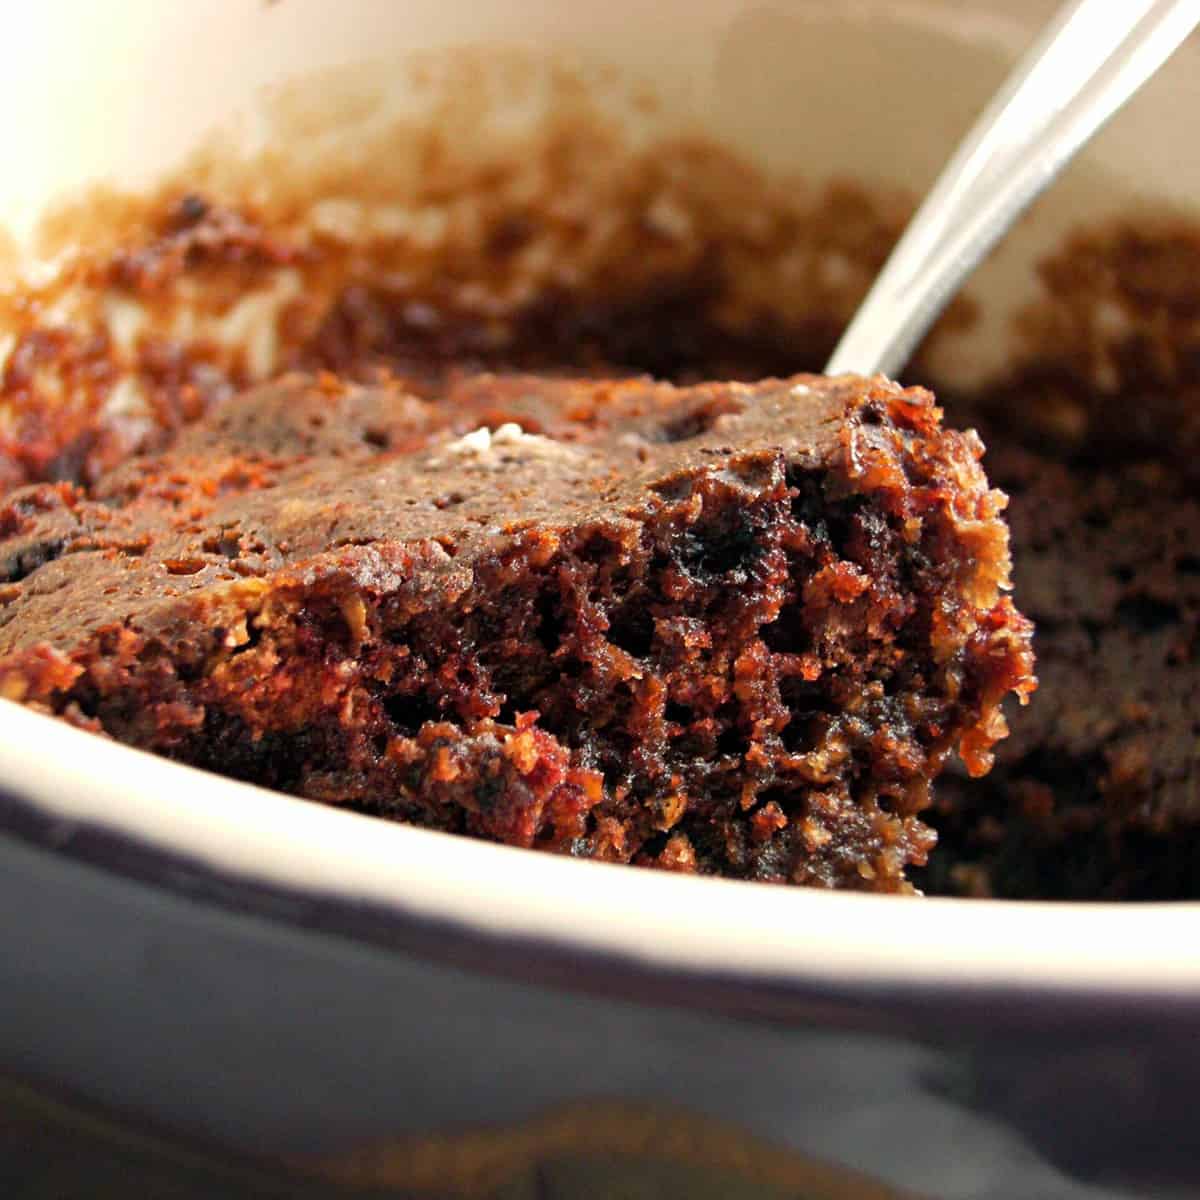  Treat yourself to a warm and moist chocolatey cake in a flash.